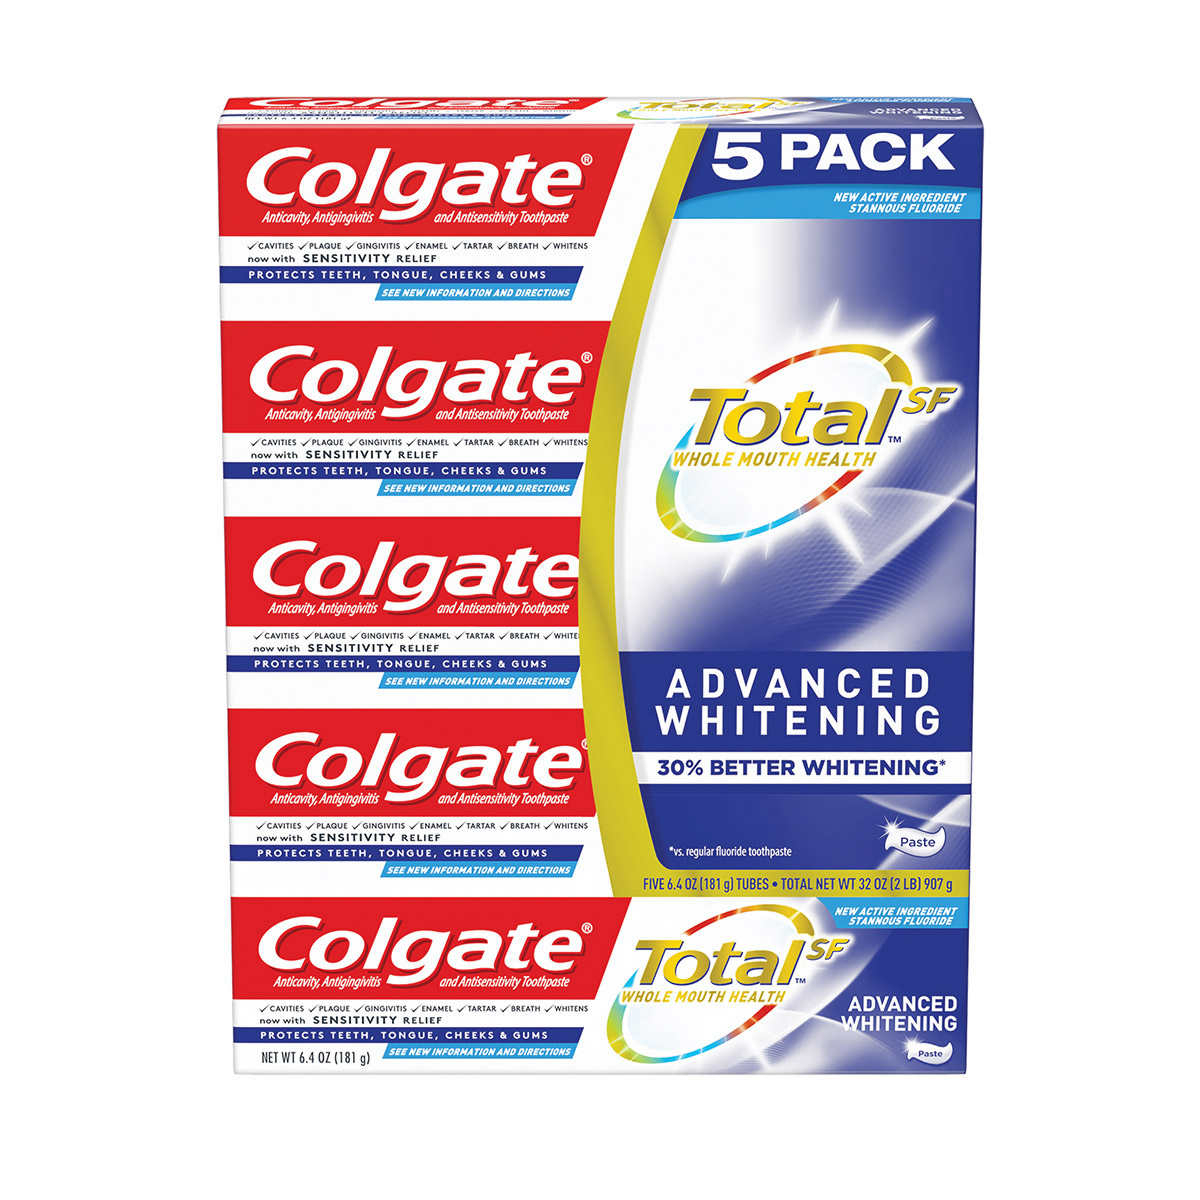 Colgate Total SF Advanced Whitening Toothpaste, 6.4 Ounce (Pack Of 5)